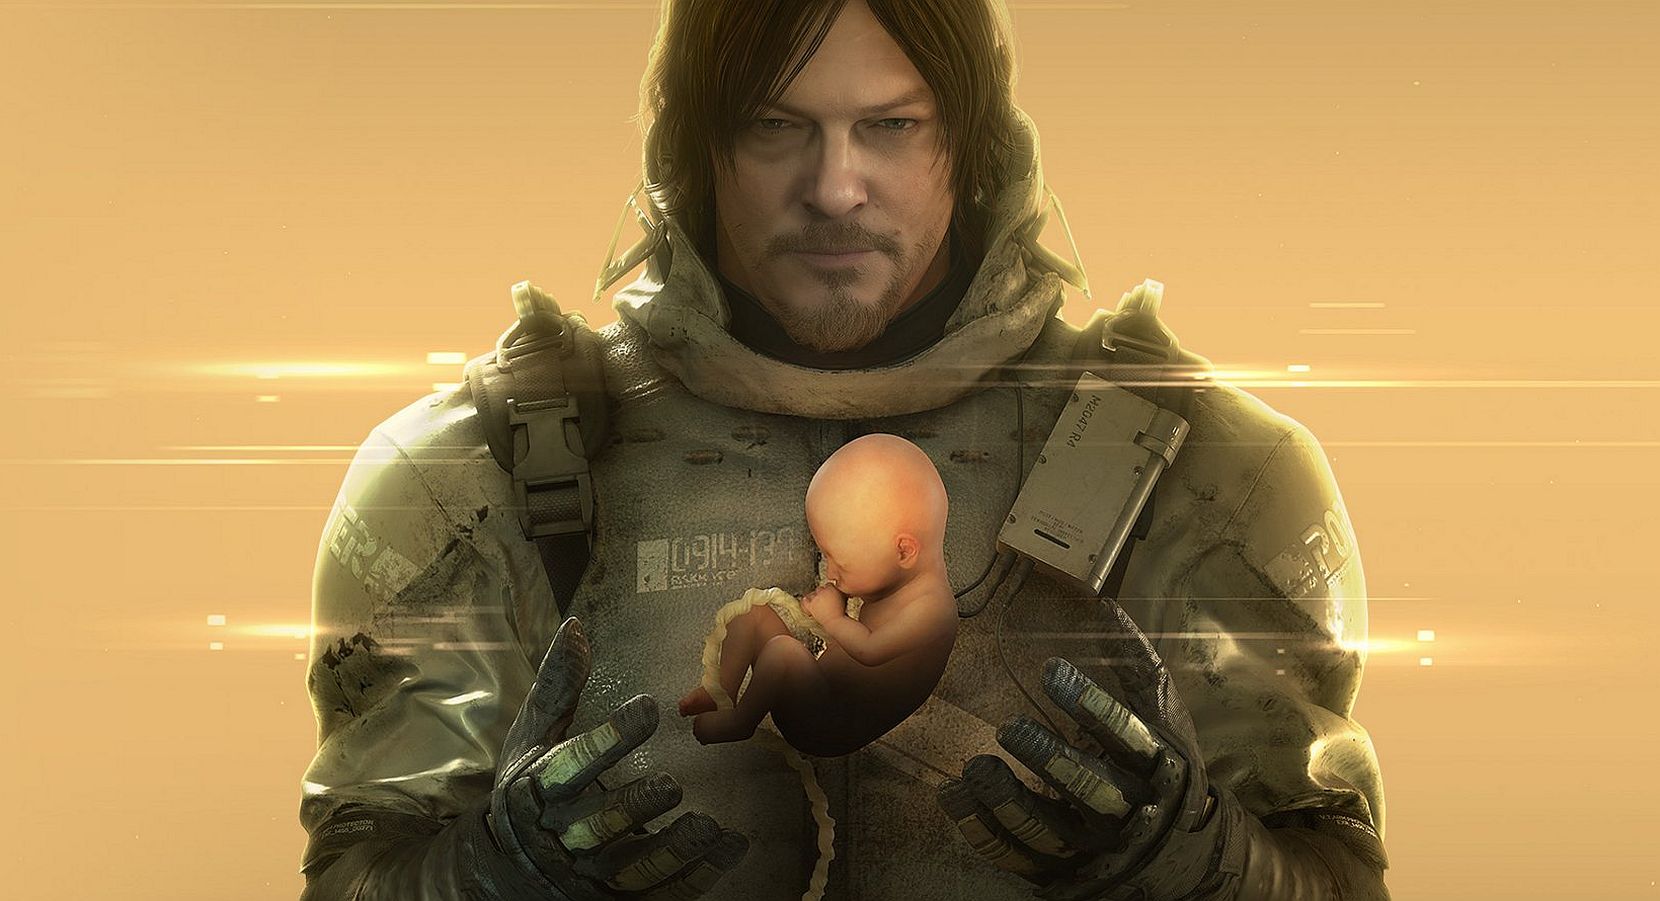 Image for Death Stranding 2 is currently in development, according to Norman Reedus